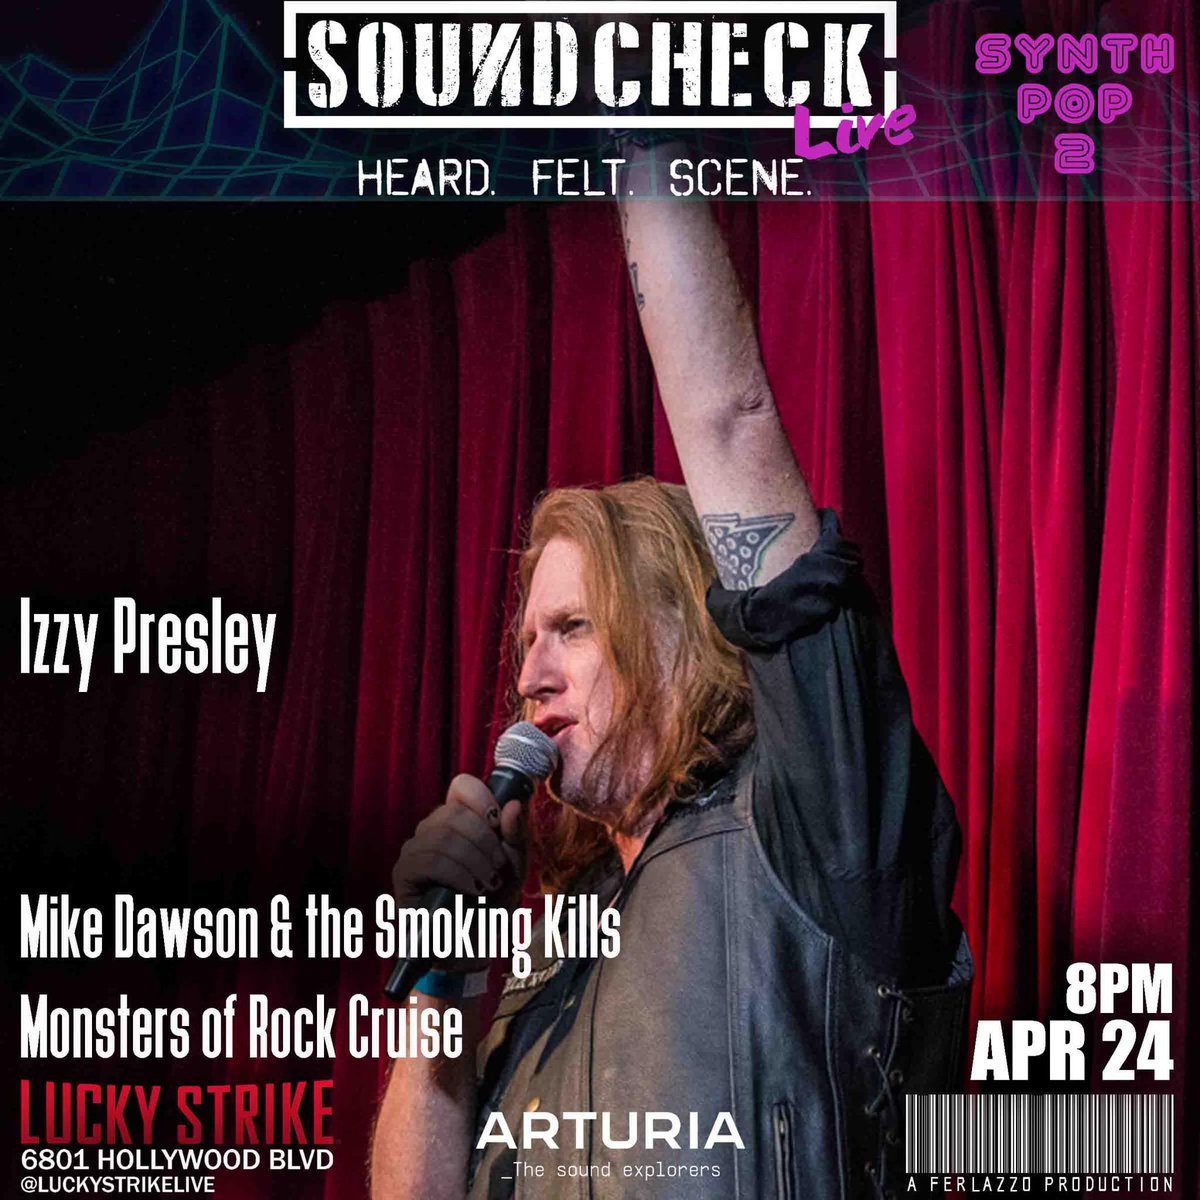 Wednesday night. Lucky Strike Live. Hollywood California. Soundtrack live. I’ll be there. You should too. Hey @ThatKevinSmith - your next chance to see the guy who should be in Twilight Of The Mallrats on stage….